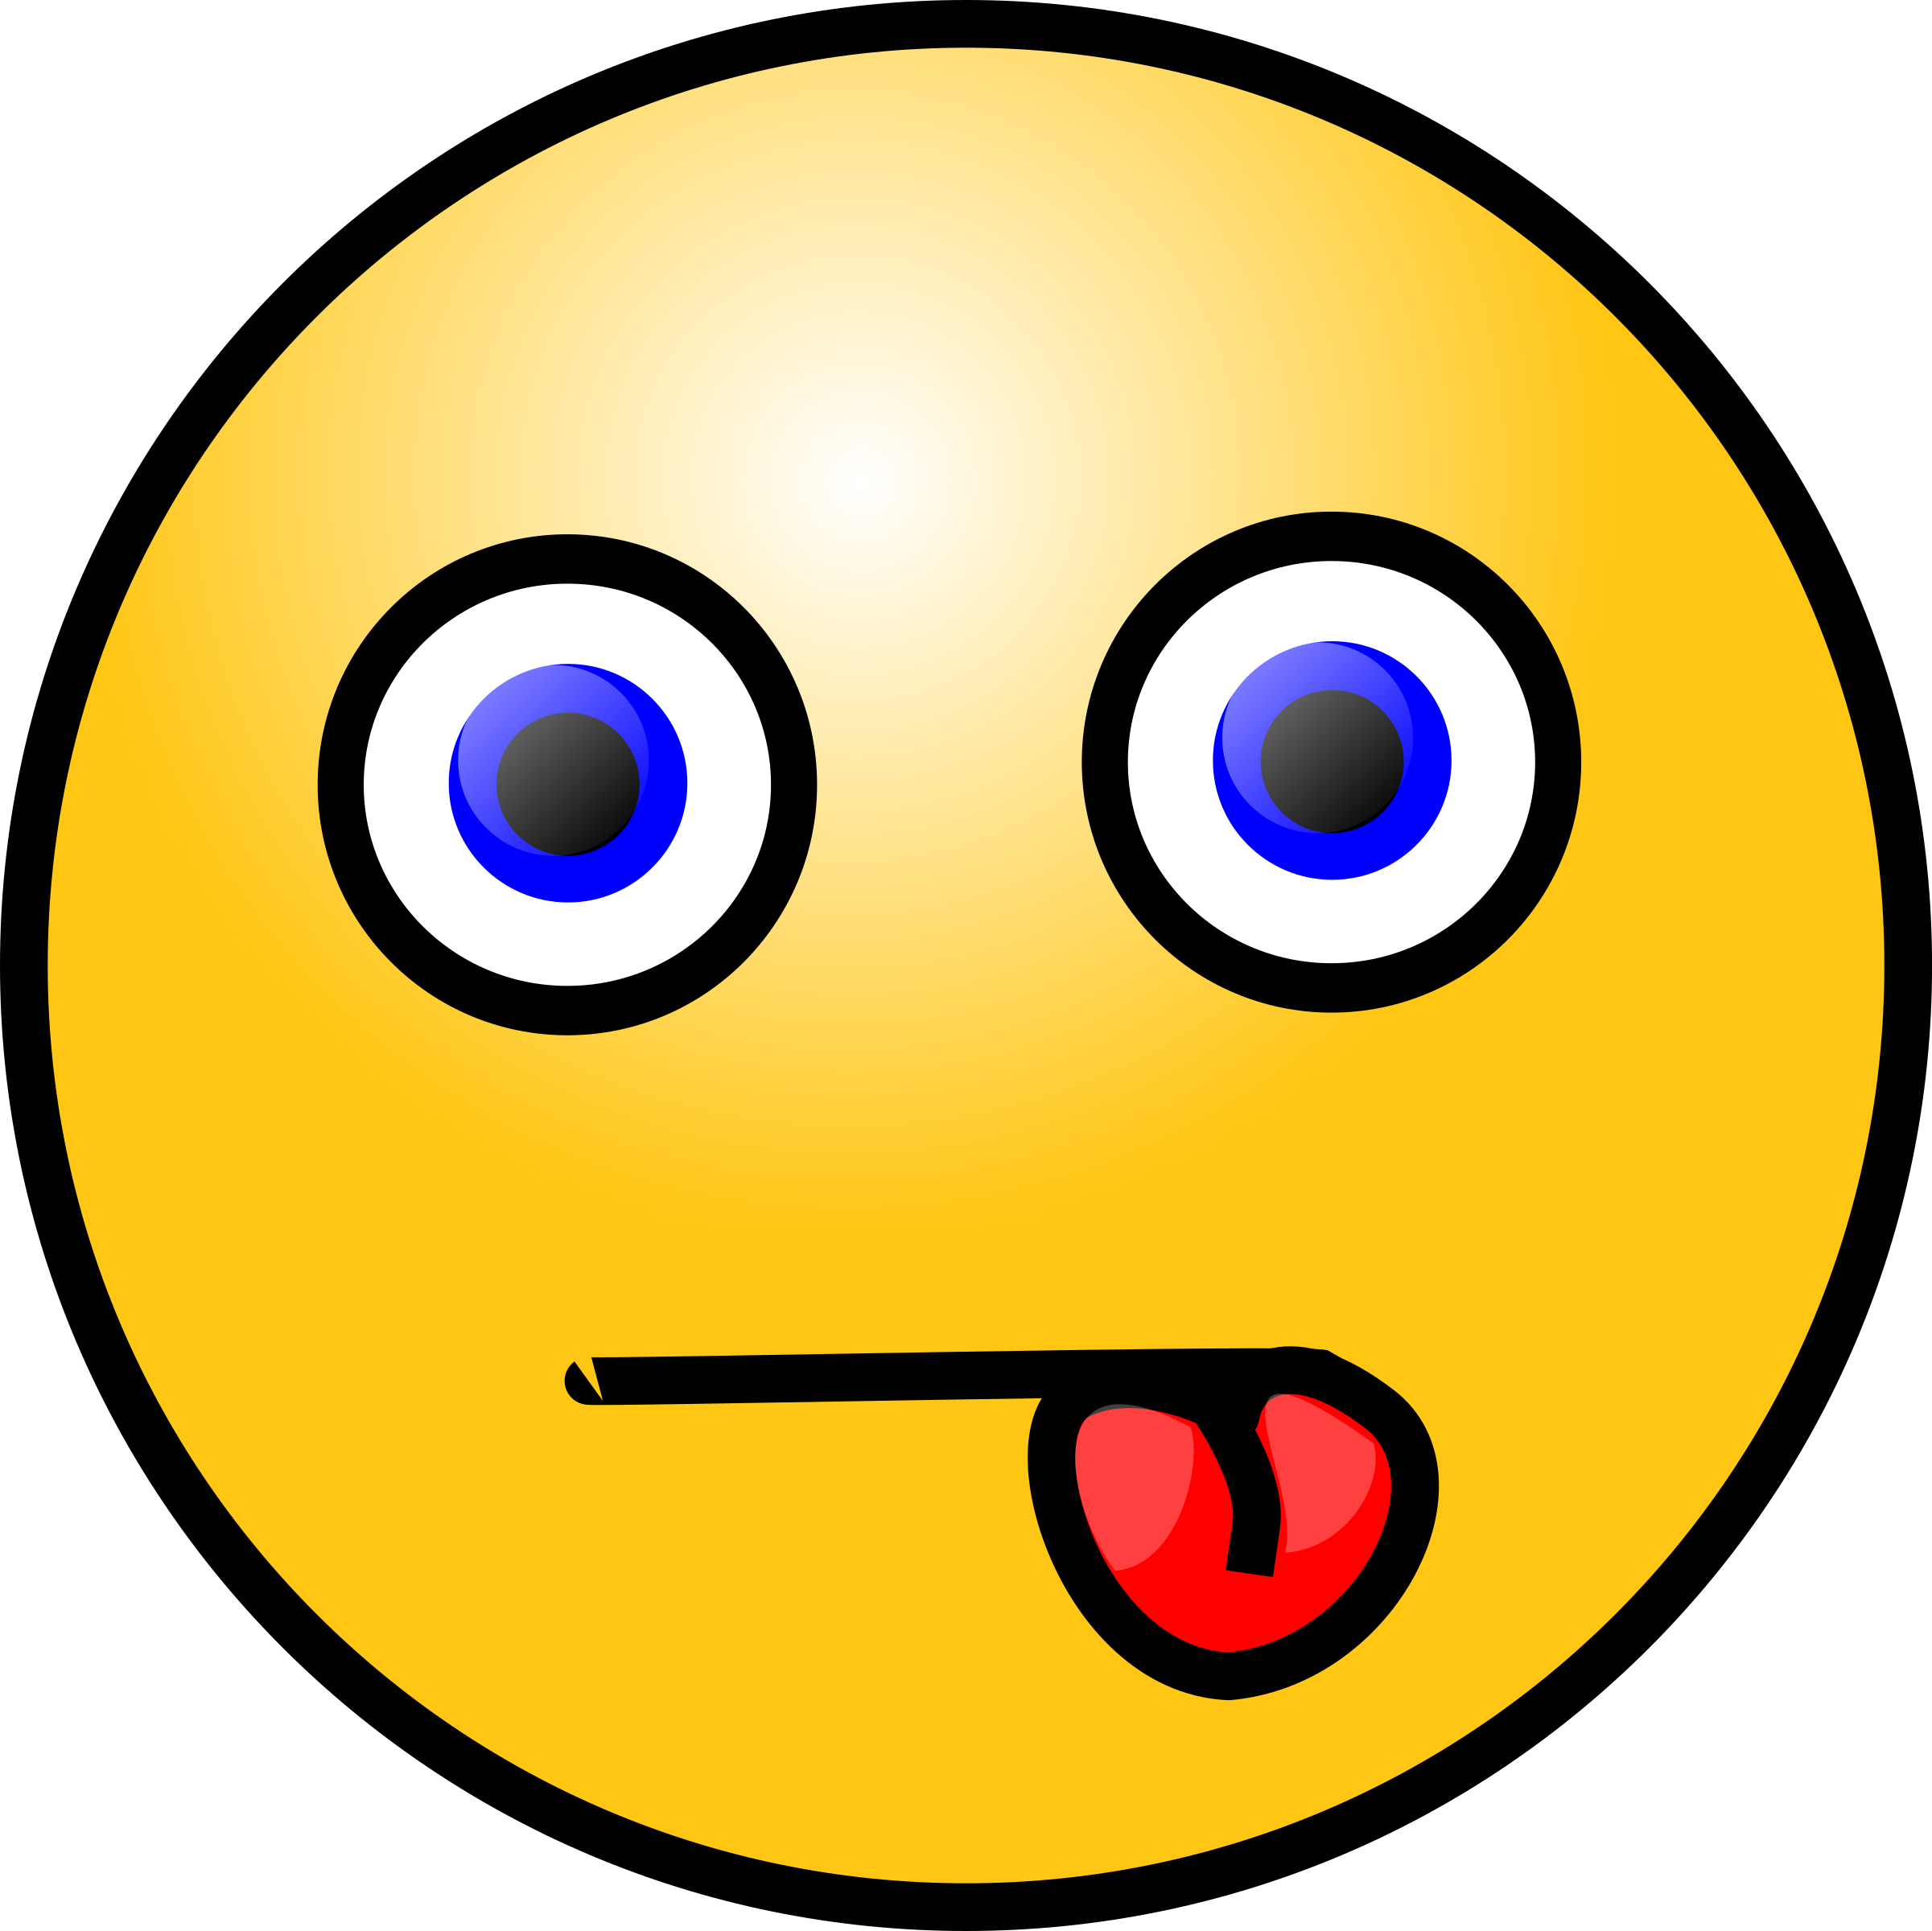 Clipart - Emoticons: Tongue in cheek